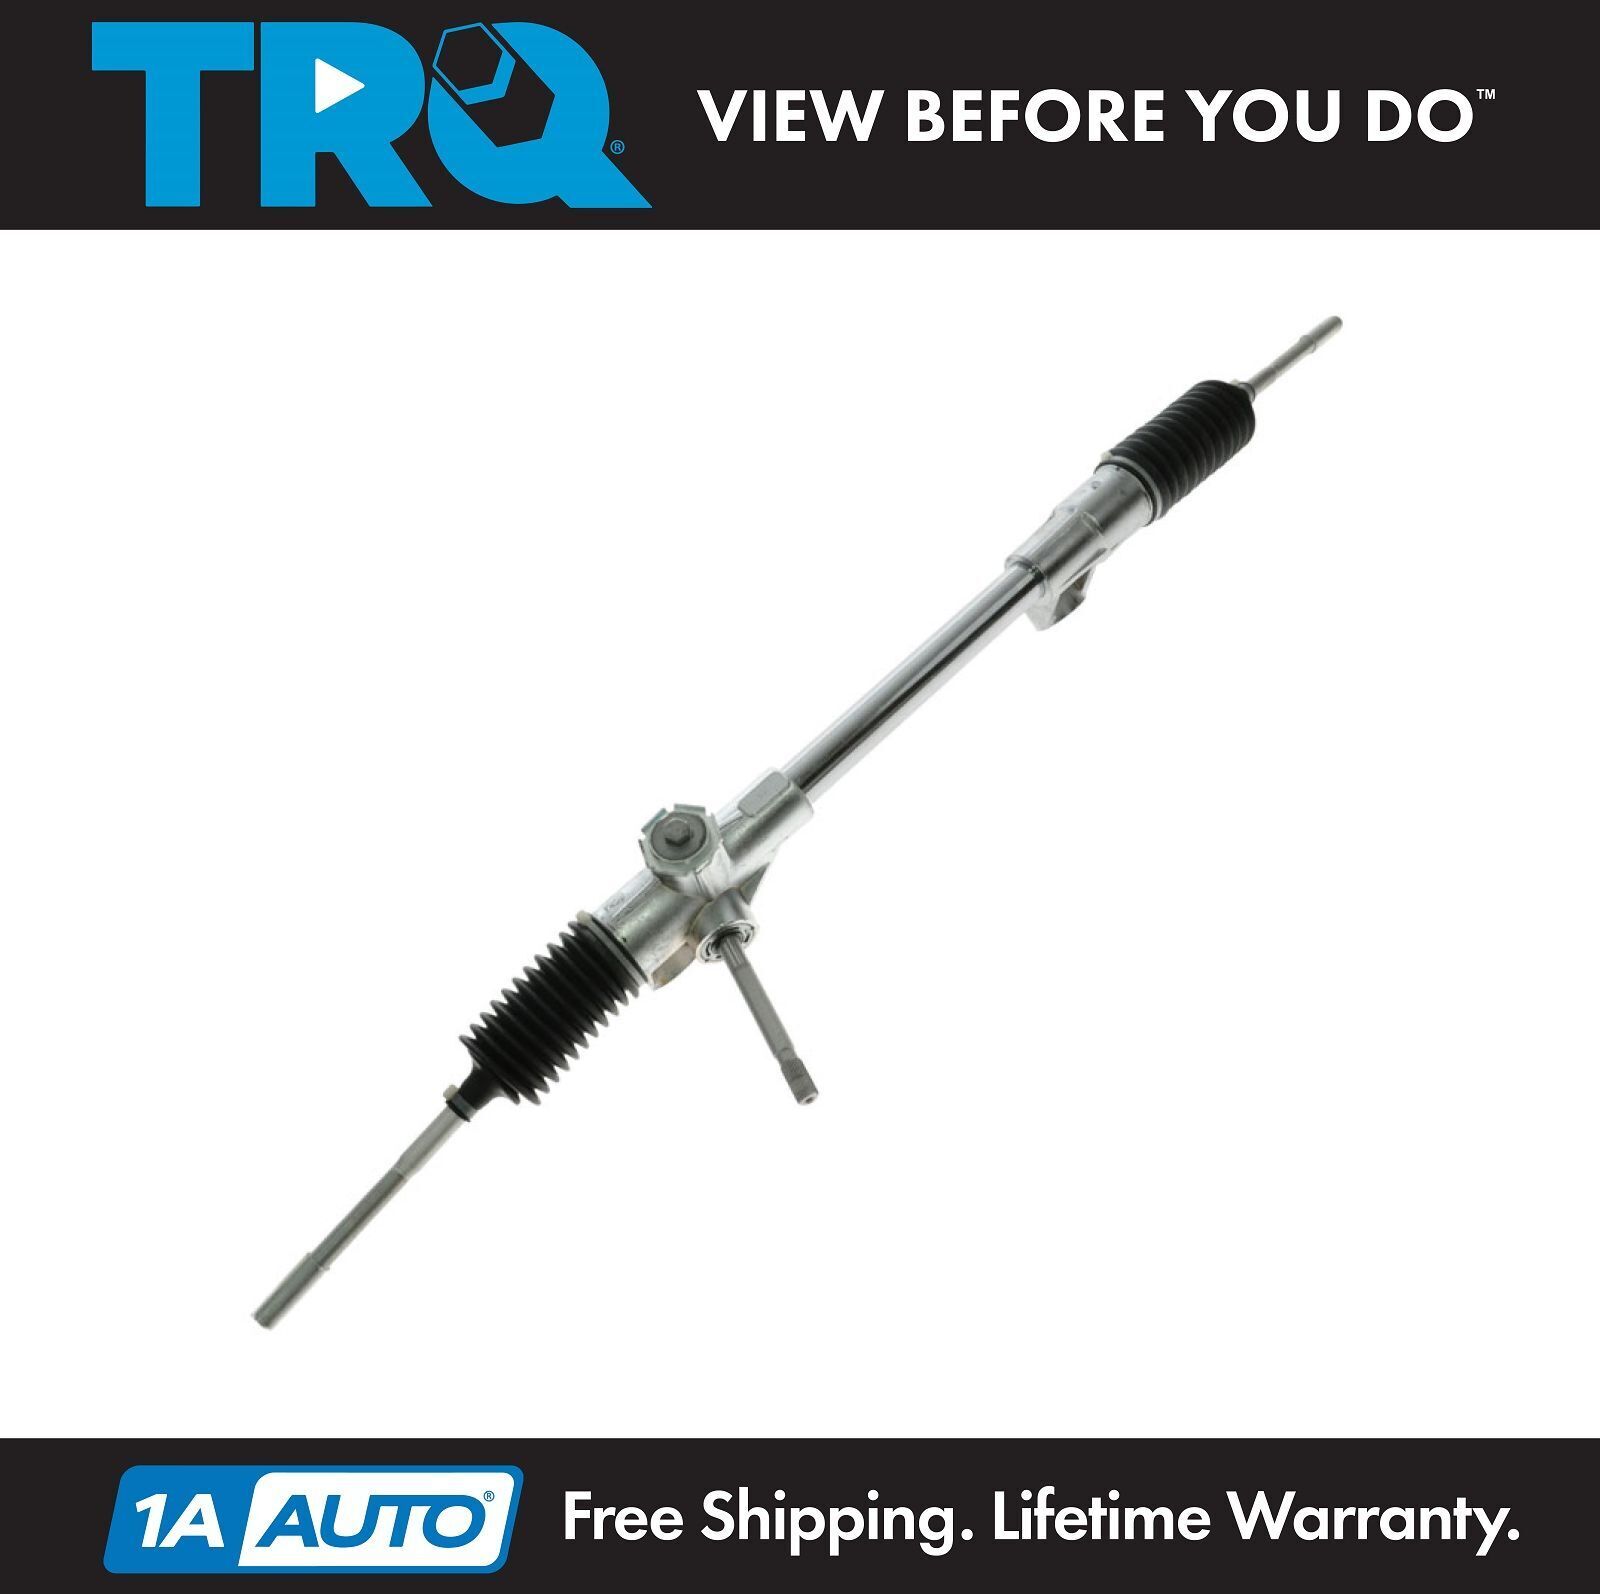 TRQ New Manual Steering Rack & Pinion Fits 74-80 Ford Mustang II Pinto Bobcat